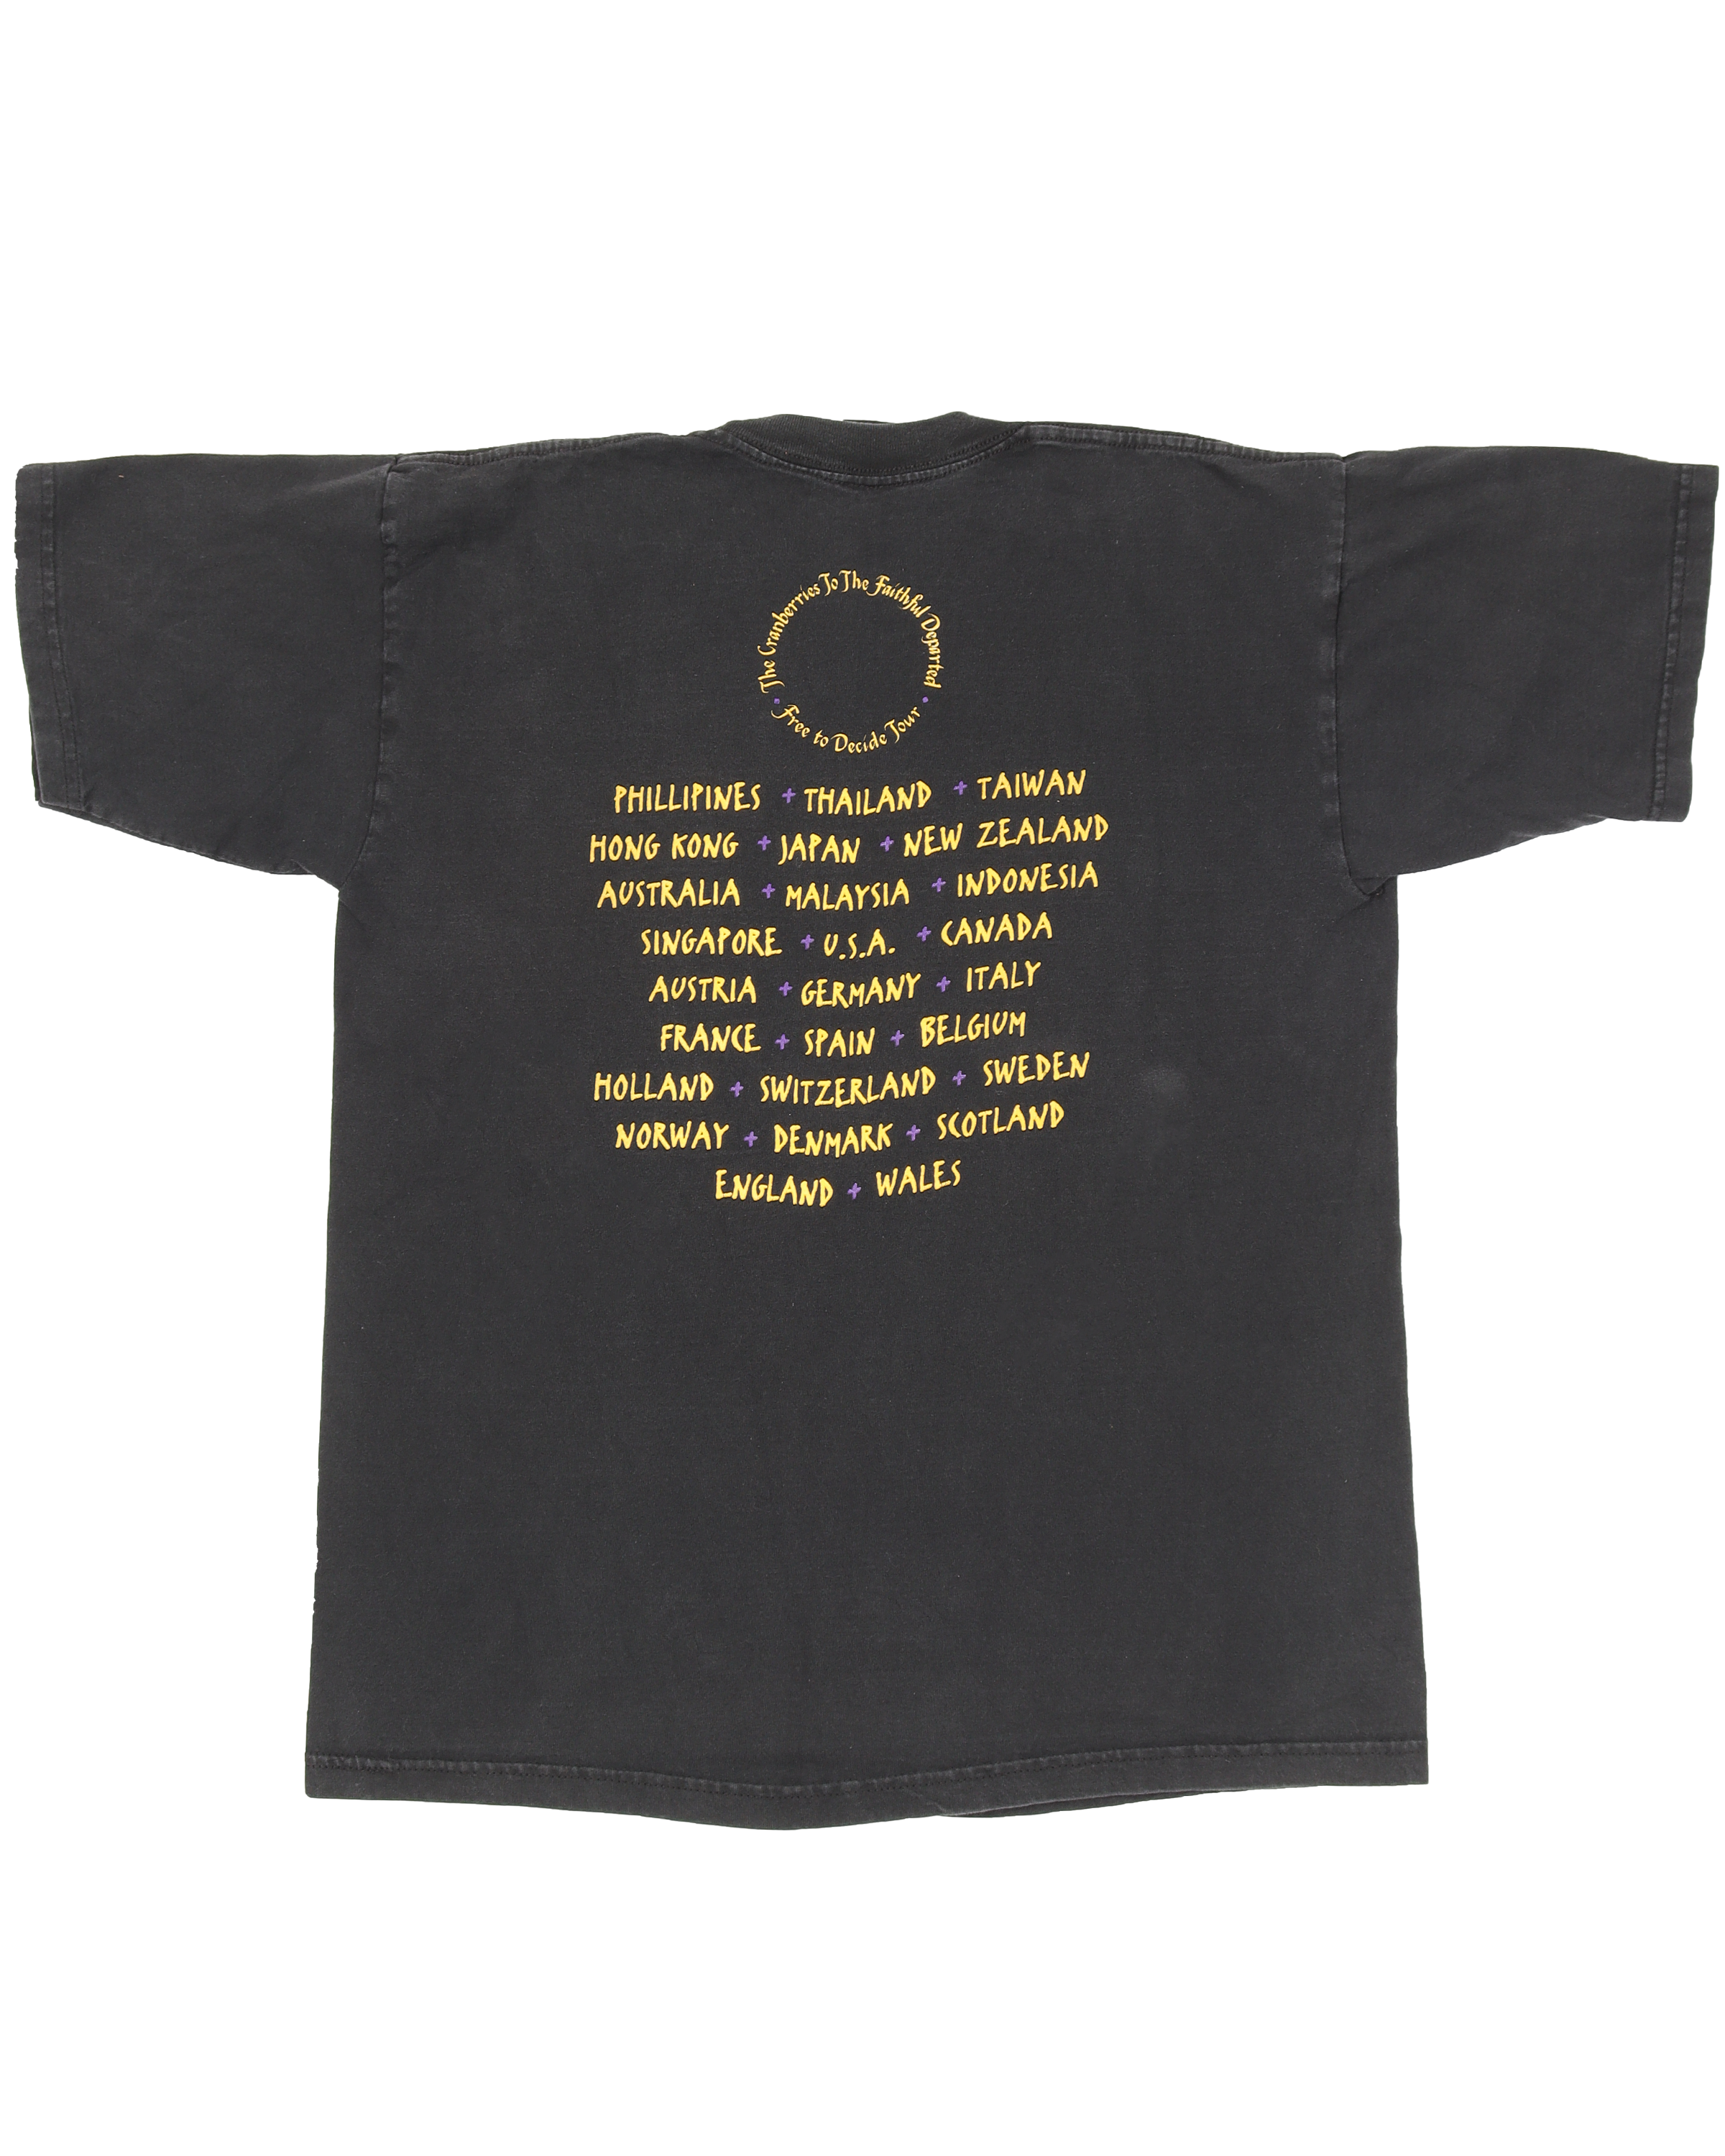 Cranberries Free to Decide Tour T-Shirt